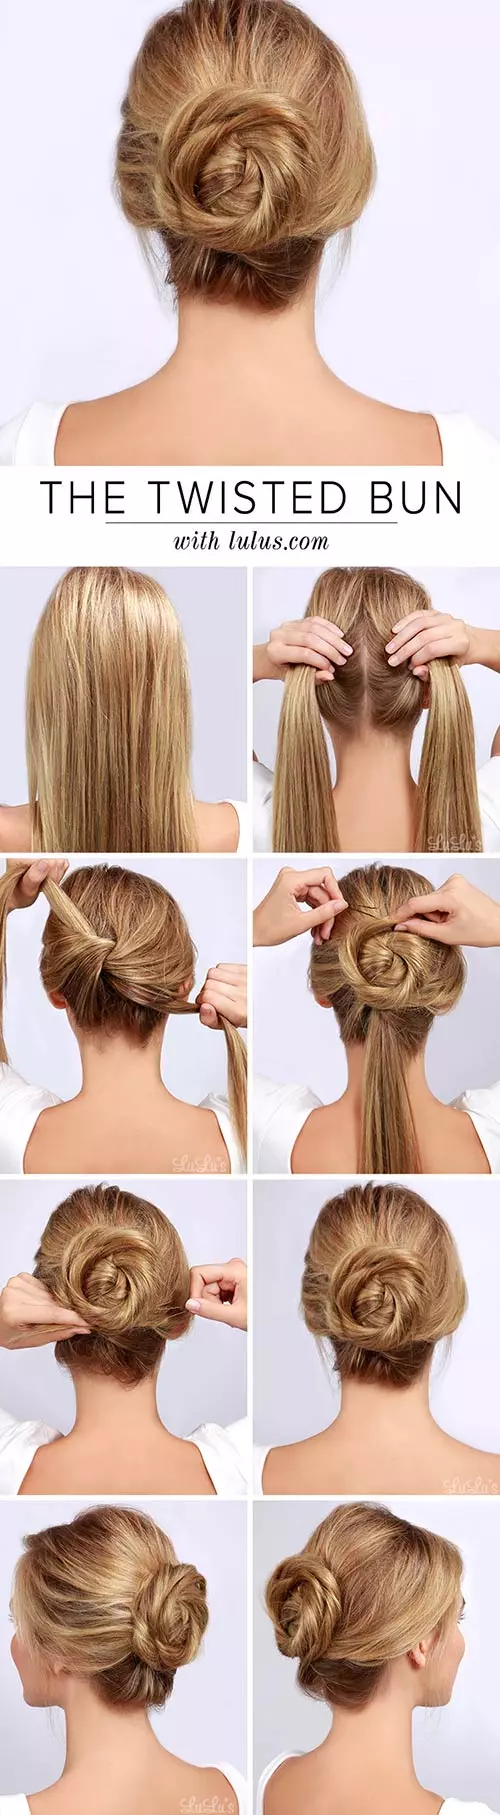 Twisted bun hairstyle tutorial for girls with long hair